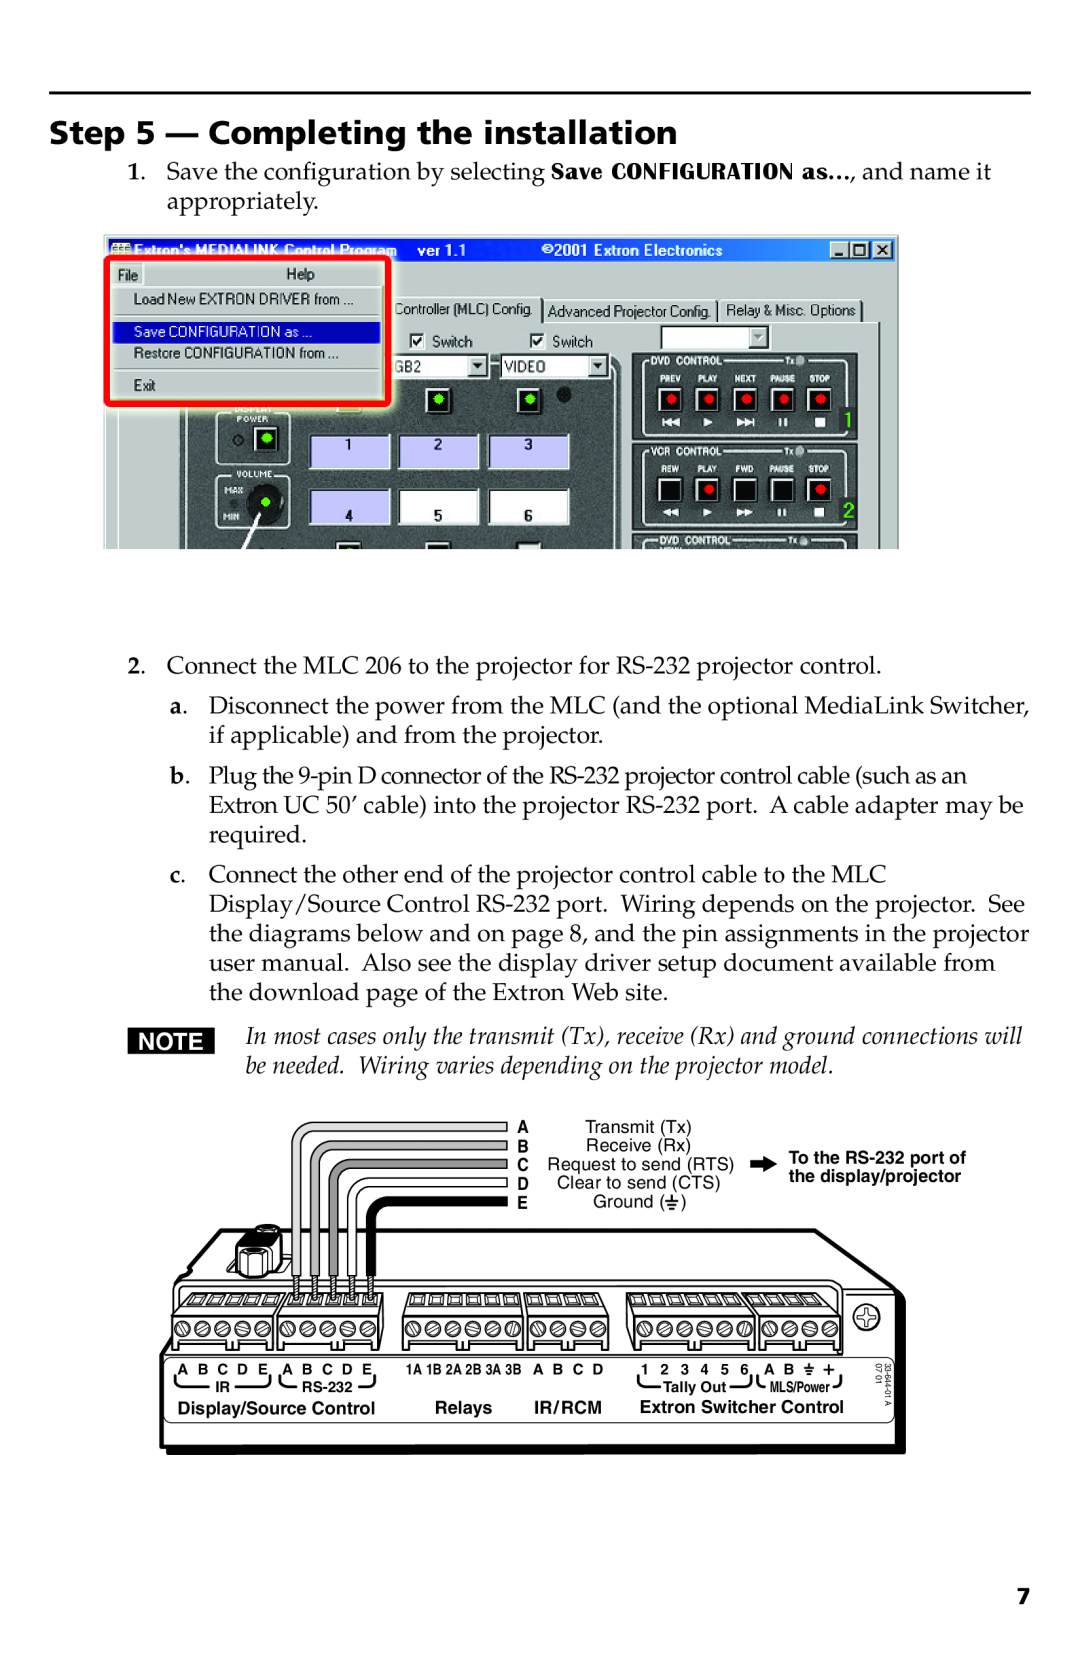 Extron electronic MLC 206 setup guide Completing the installation, Display/Source Control, Relays, Ir/Rcm 